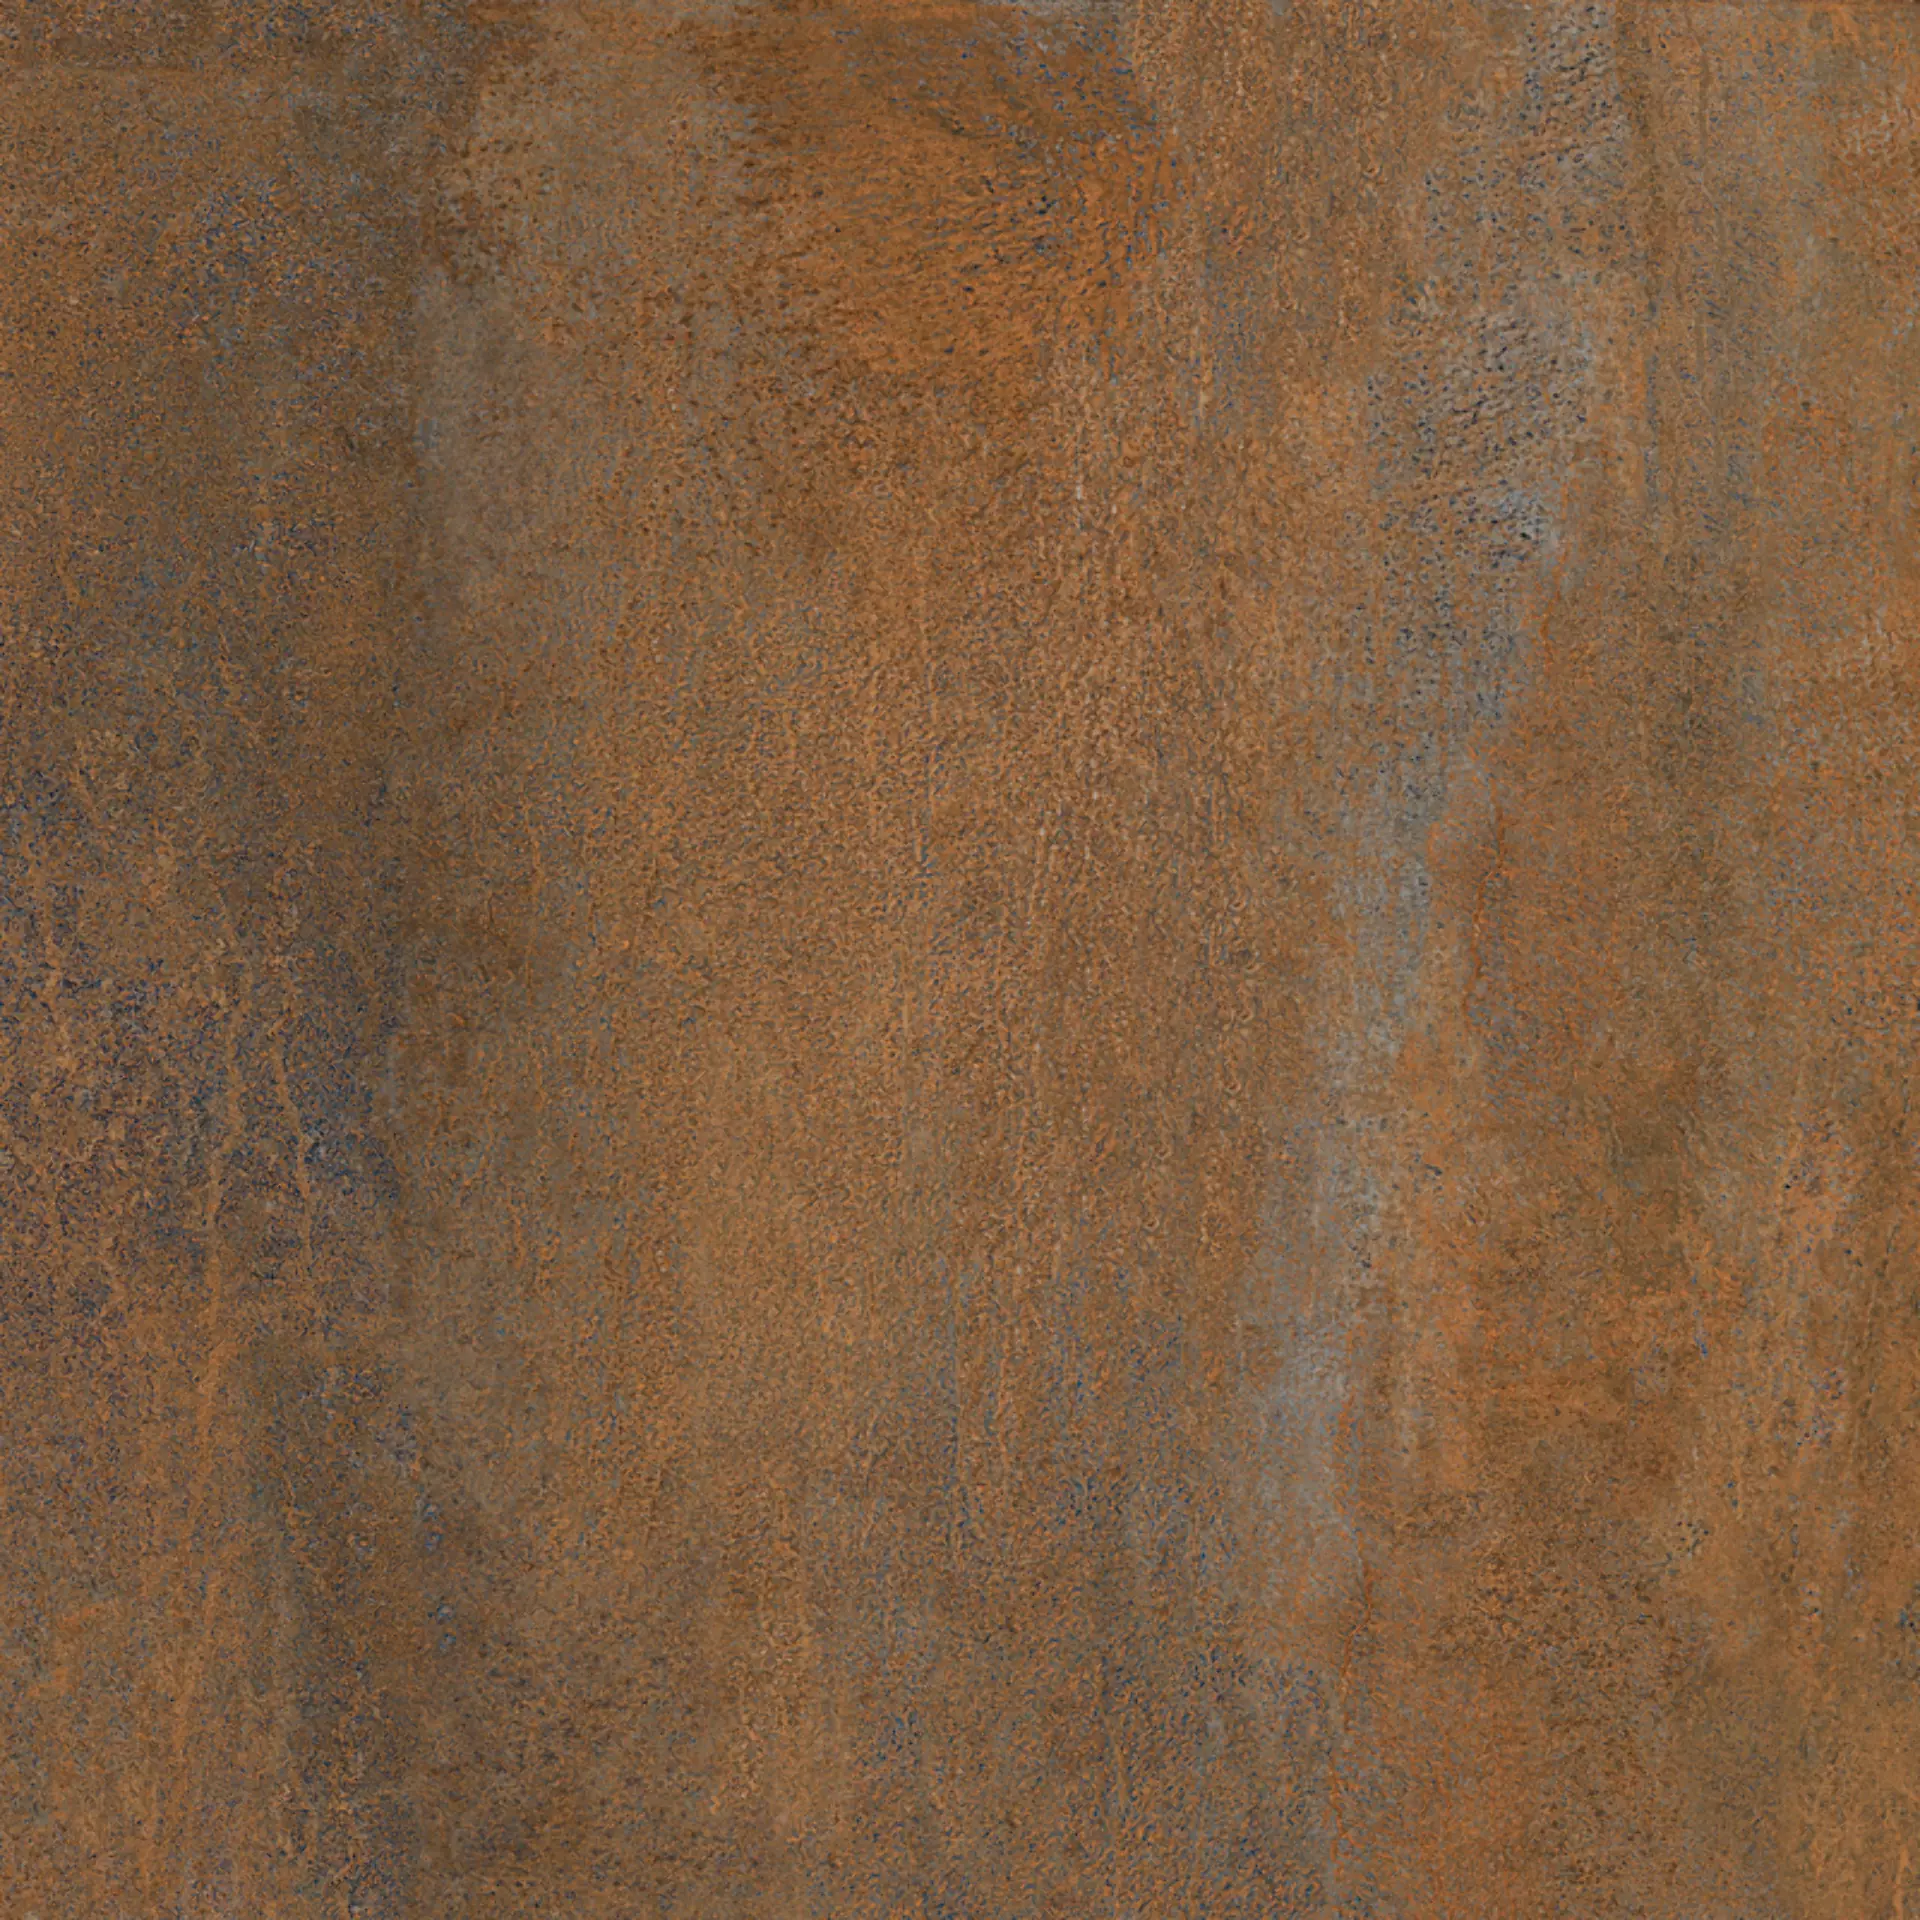 Sant Agostino Oxidart Copper Natural CSAOX7CO12 120x120cm rectified 10mm